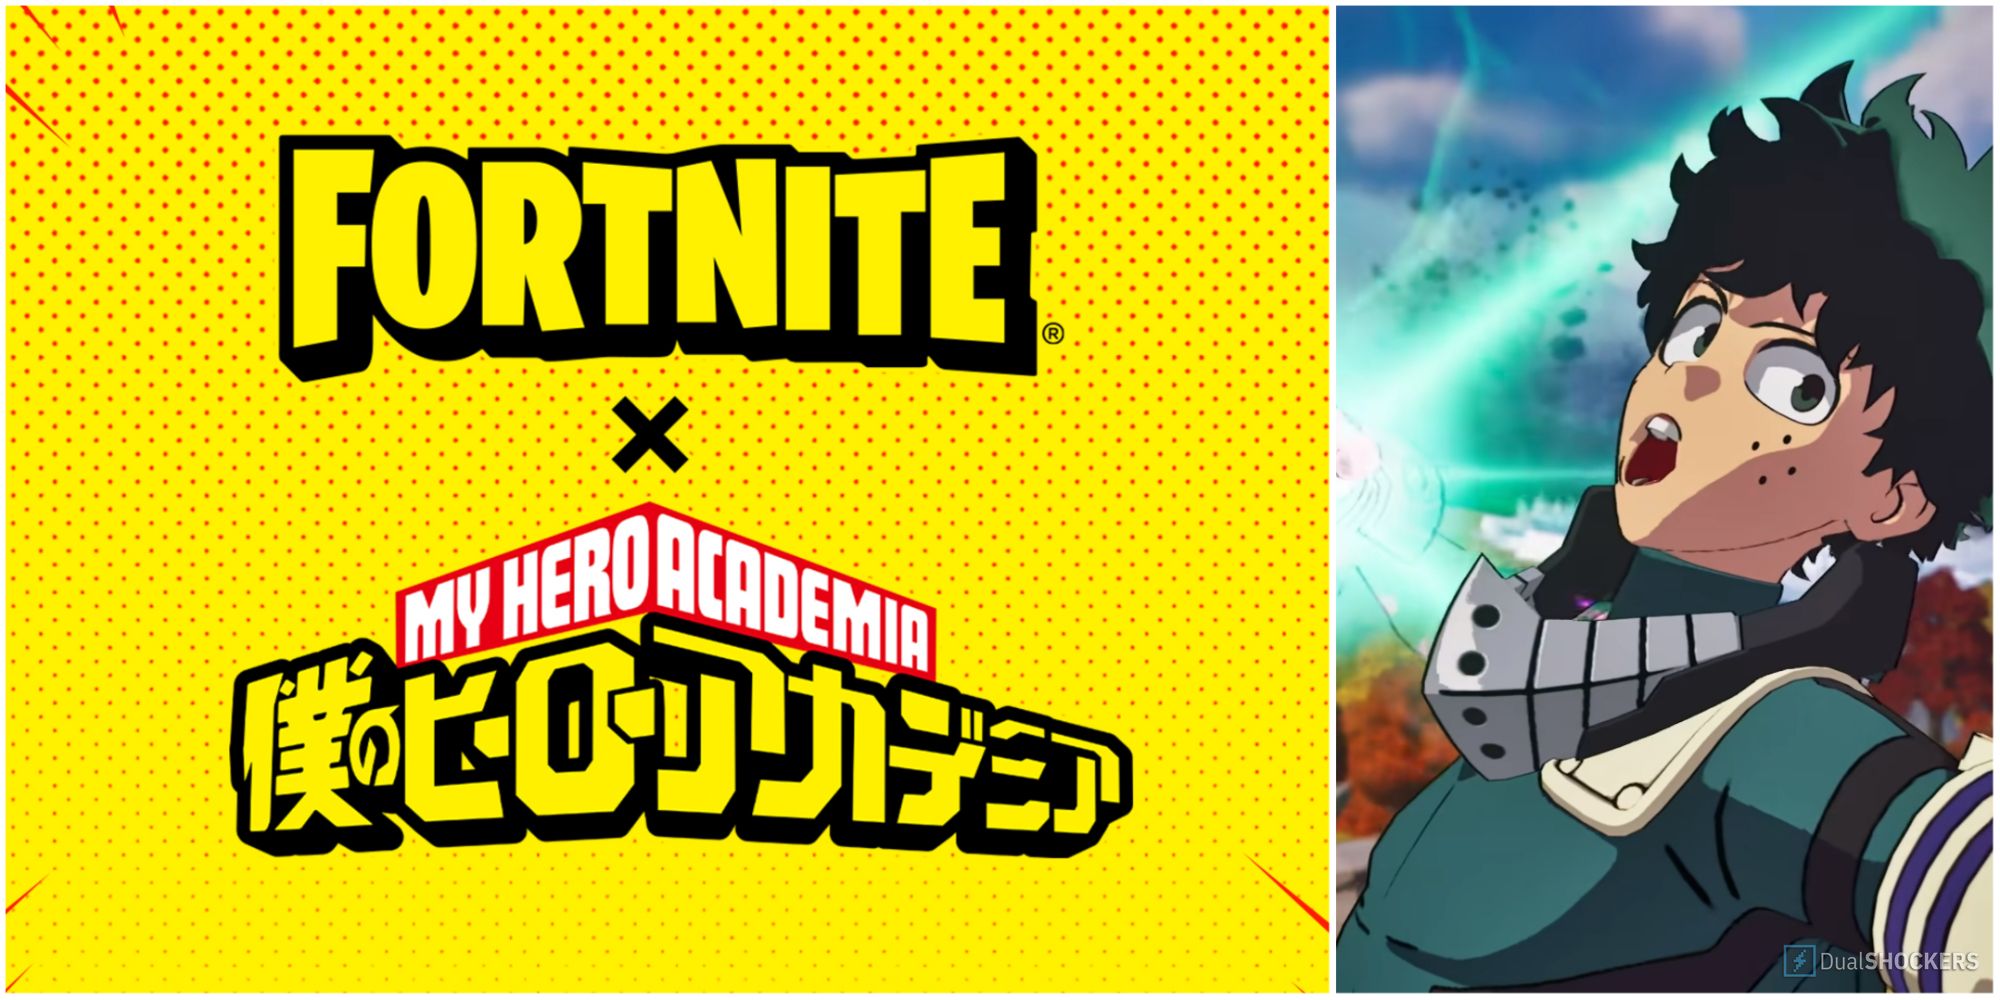 Fortnite just kicked off its latest anime collab with My Hero Academia -  The Verge